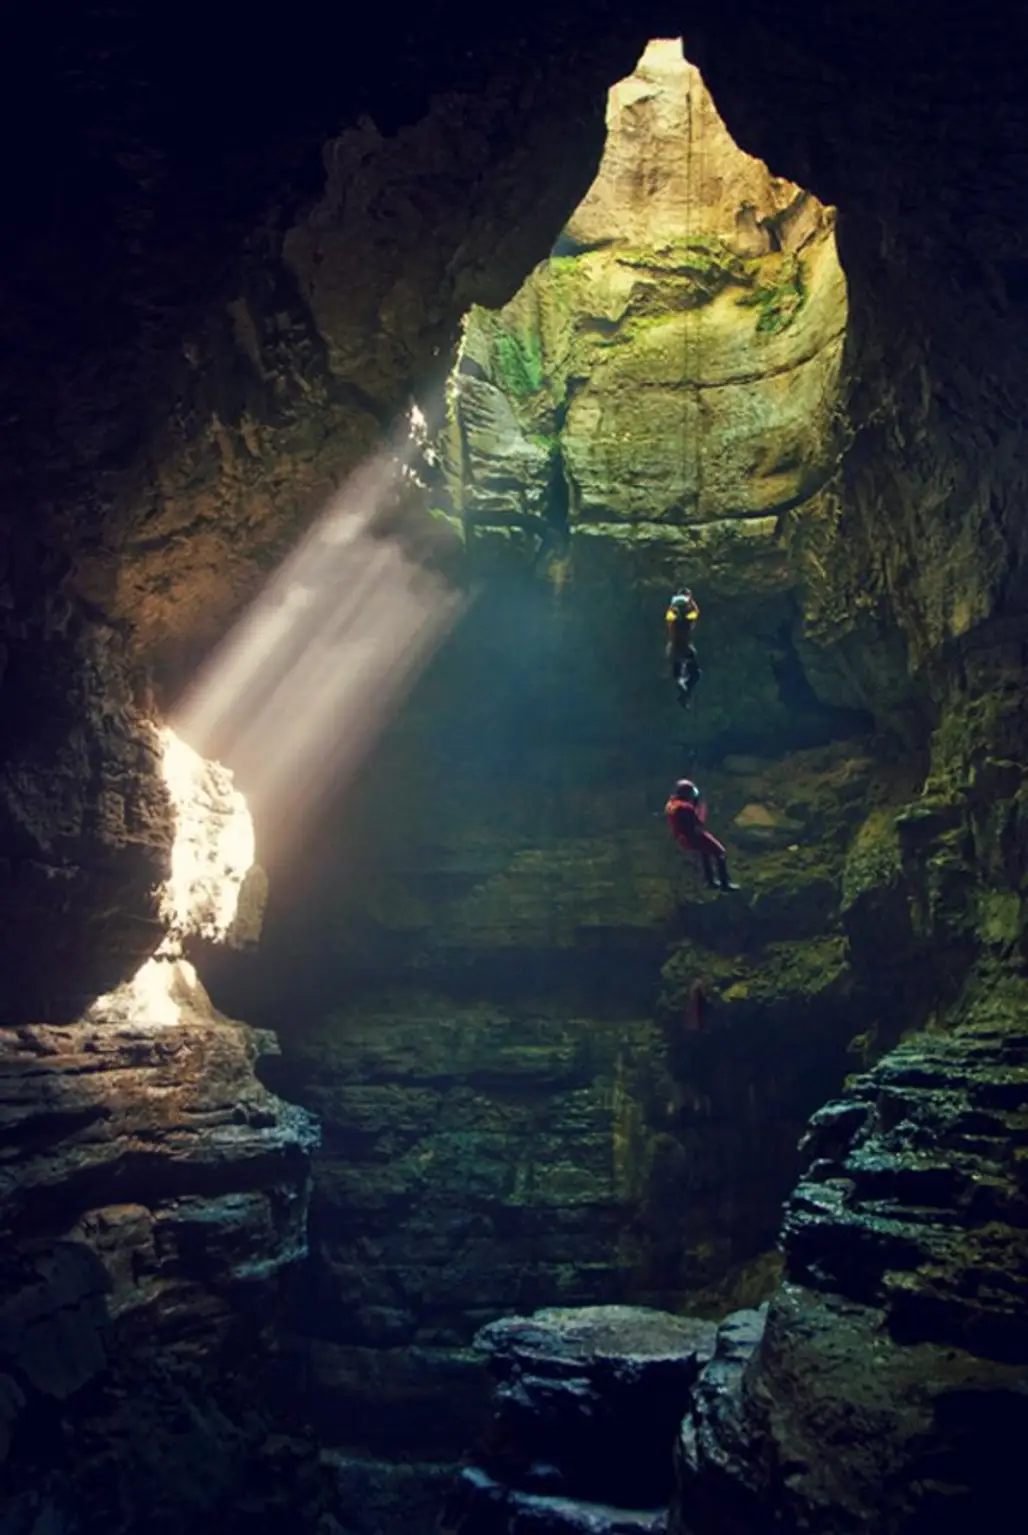 landform,geographical feature,cave,reflection,darkness,